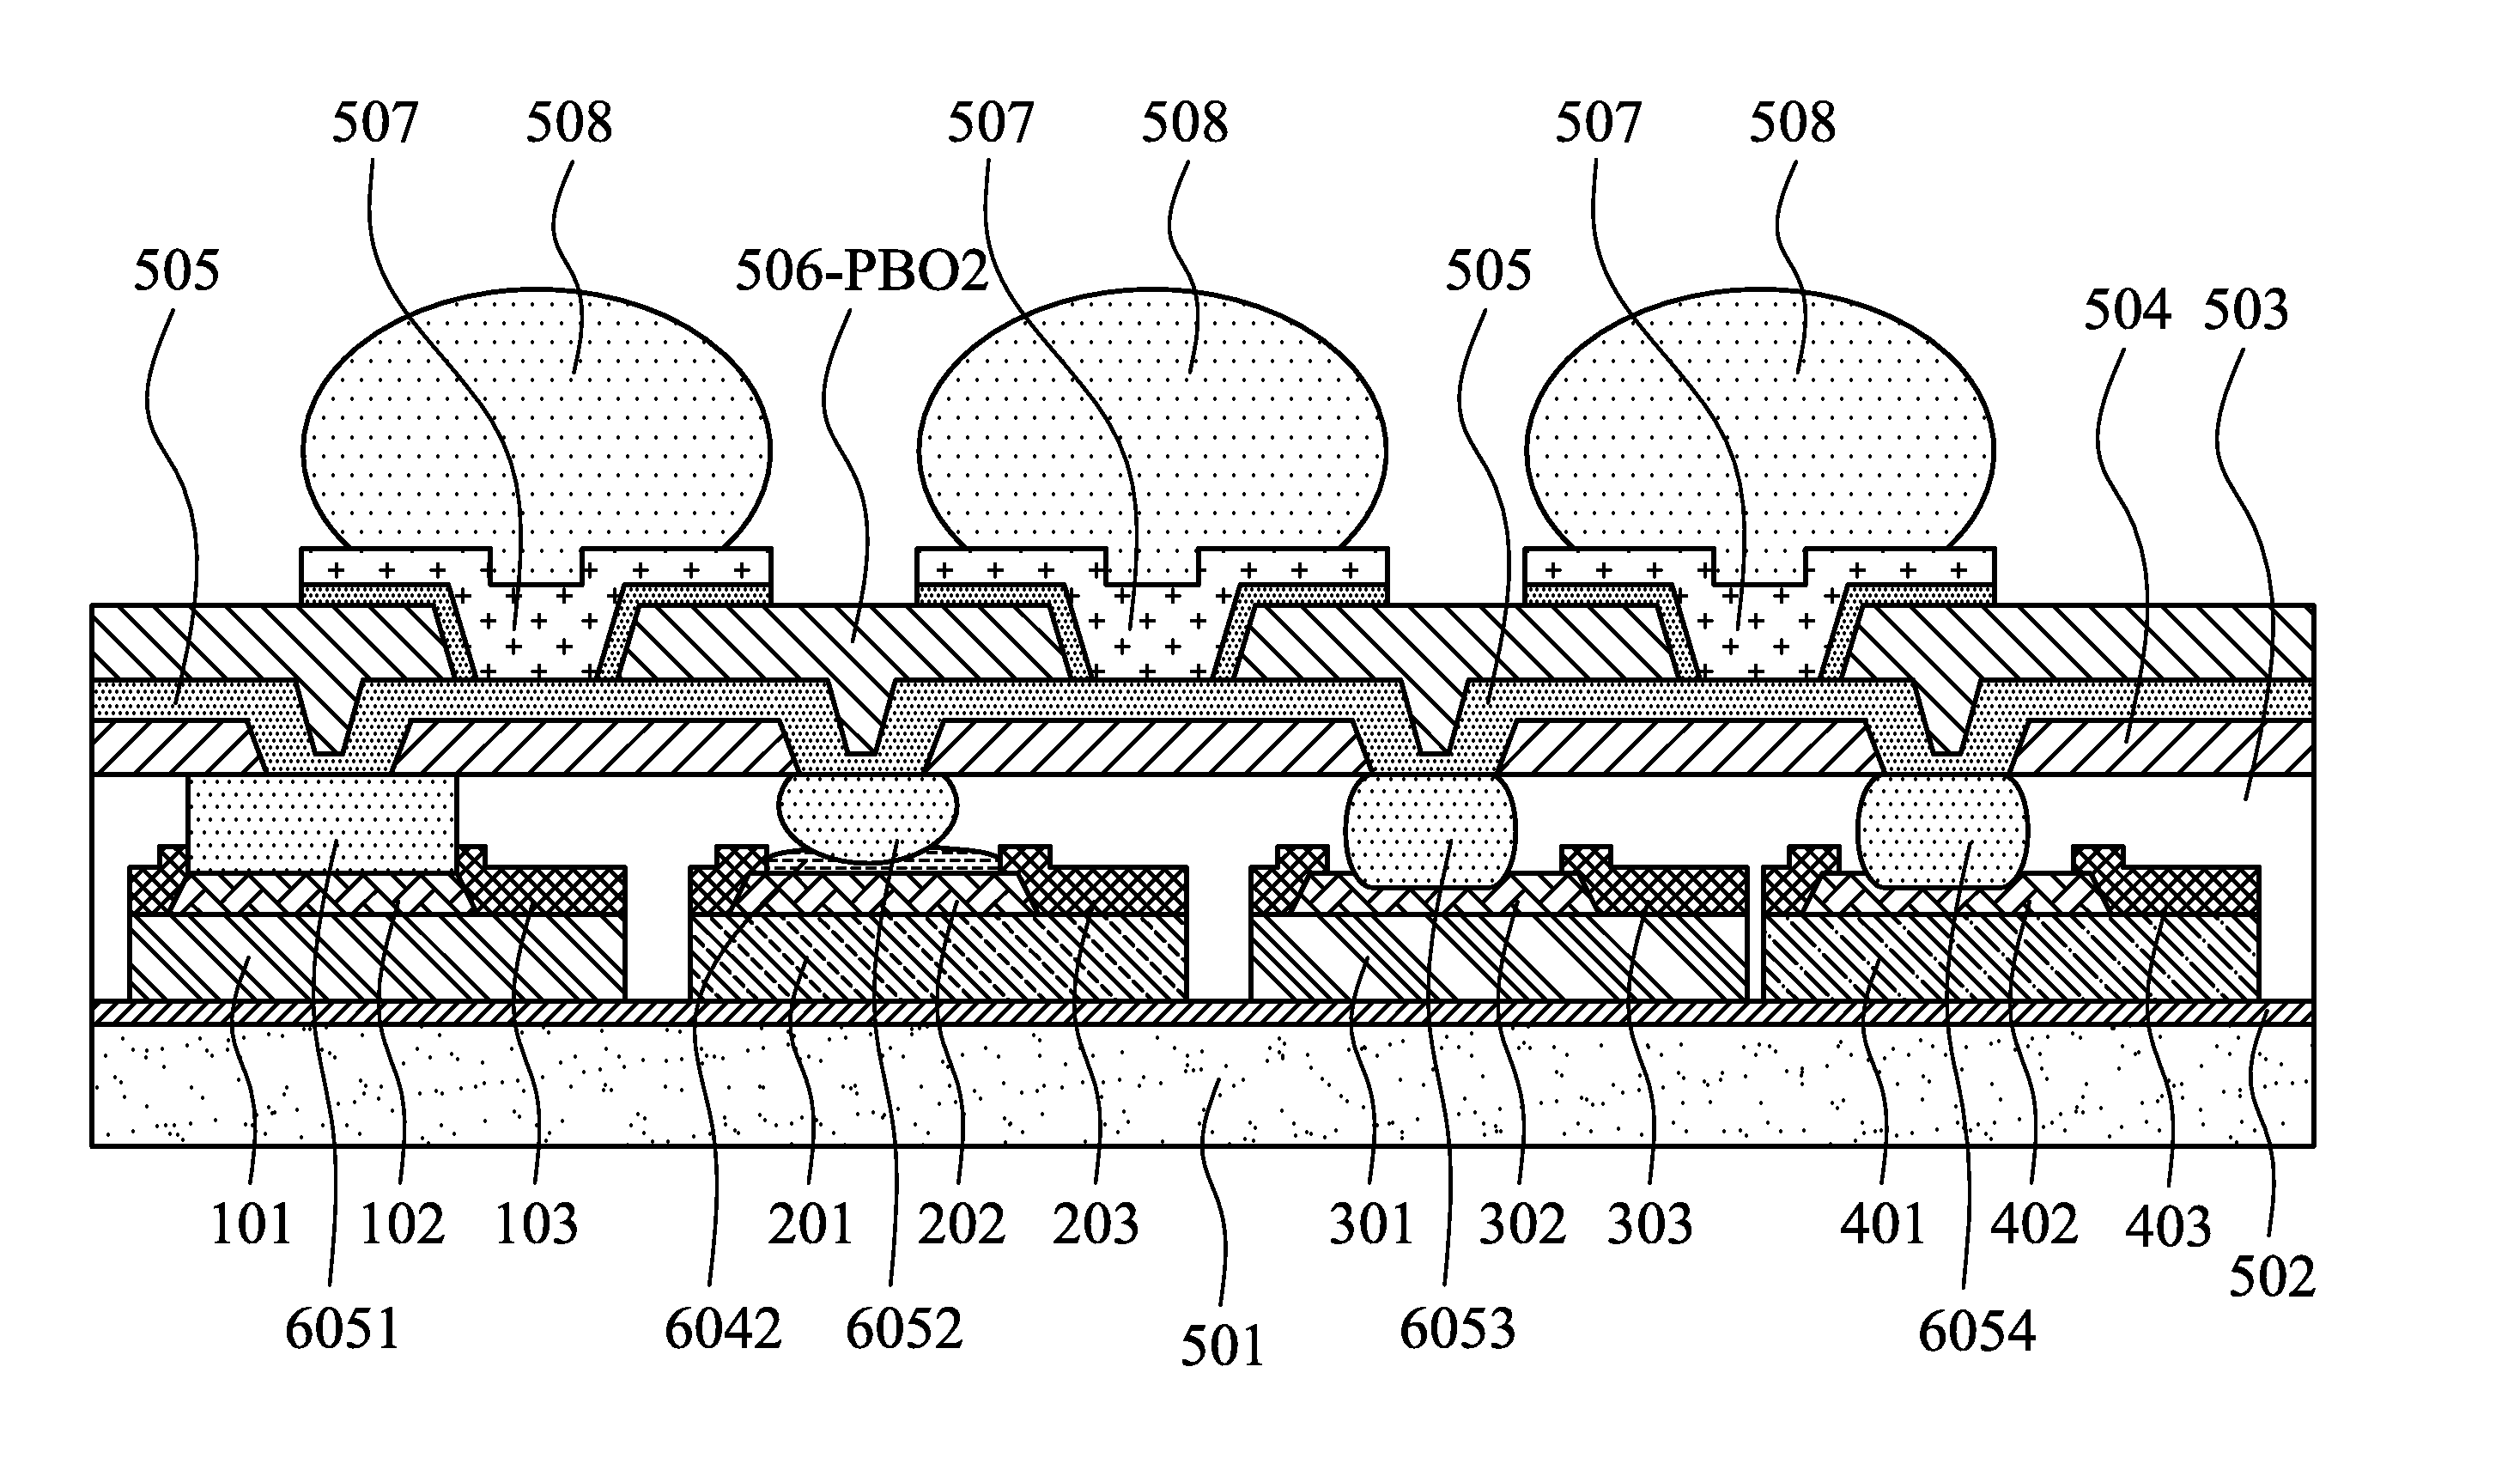 Methods and Apparatus of Wafer Level Package for Heterogeneous Integration Technology